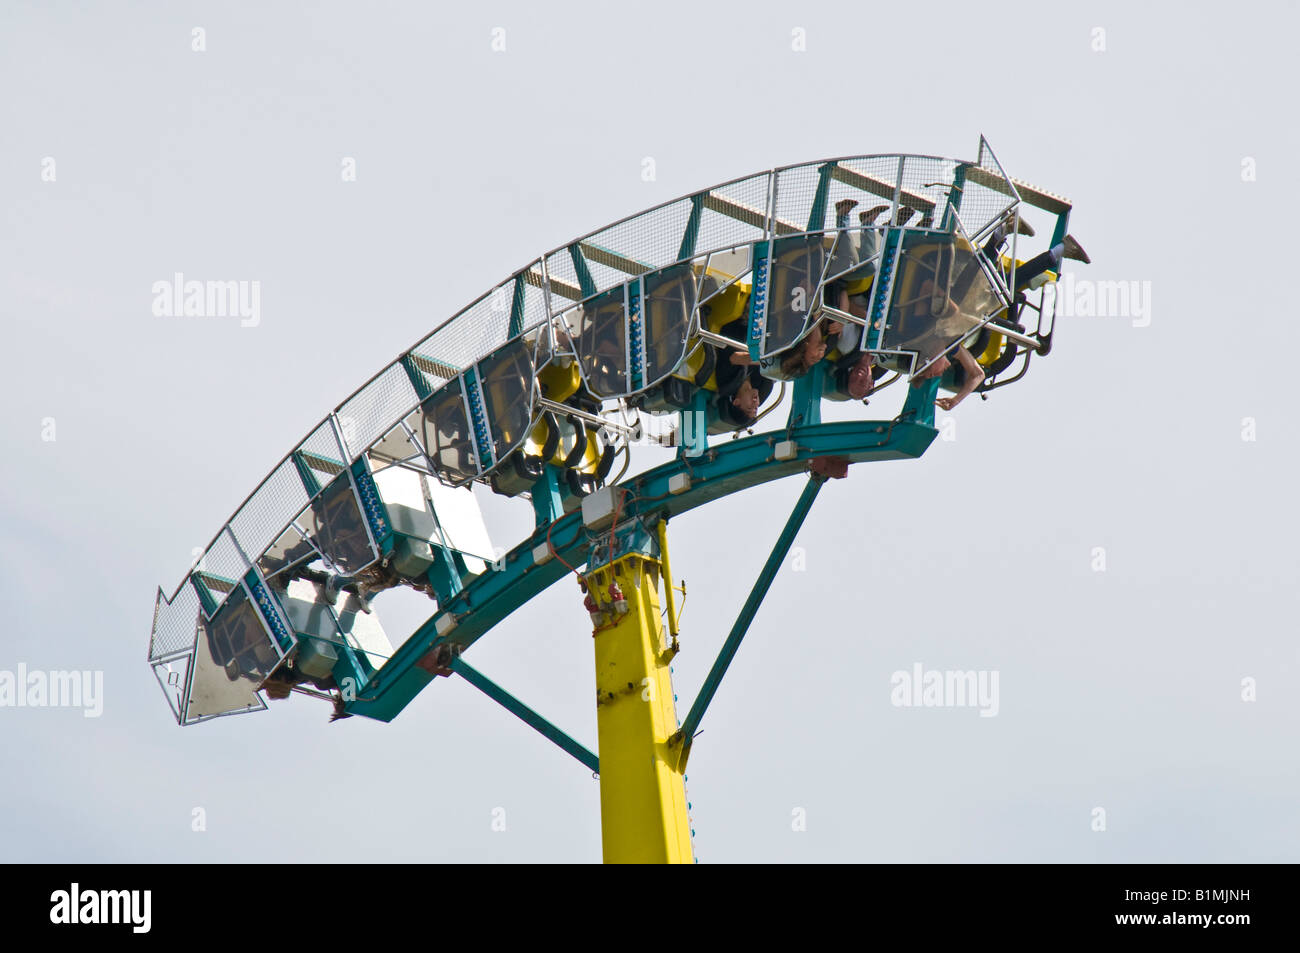 People upside down in fairground ride showing safety caging and other safety features Stock Photo